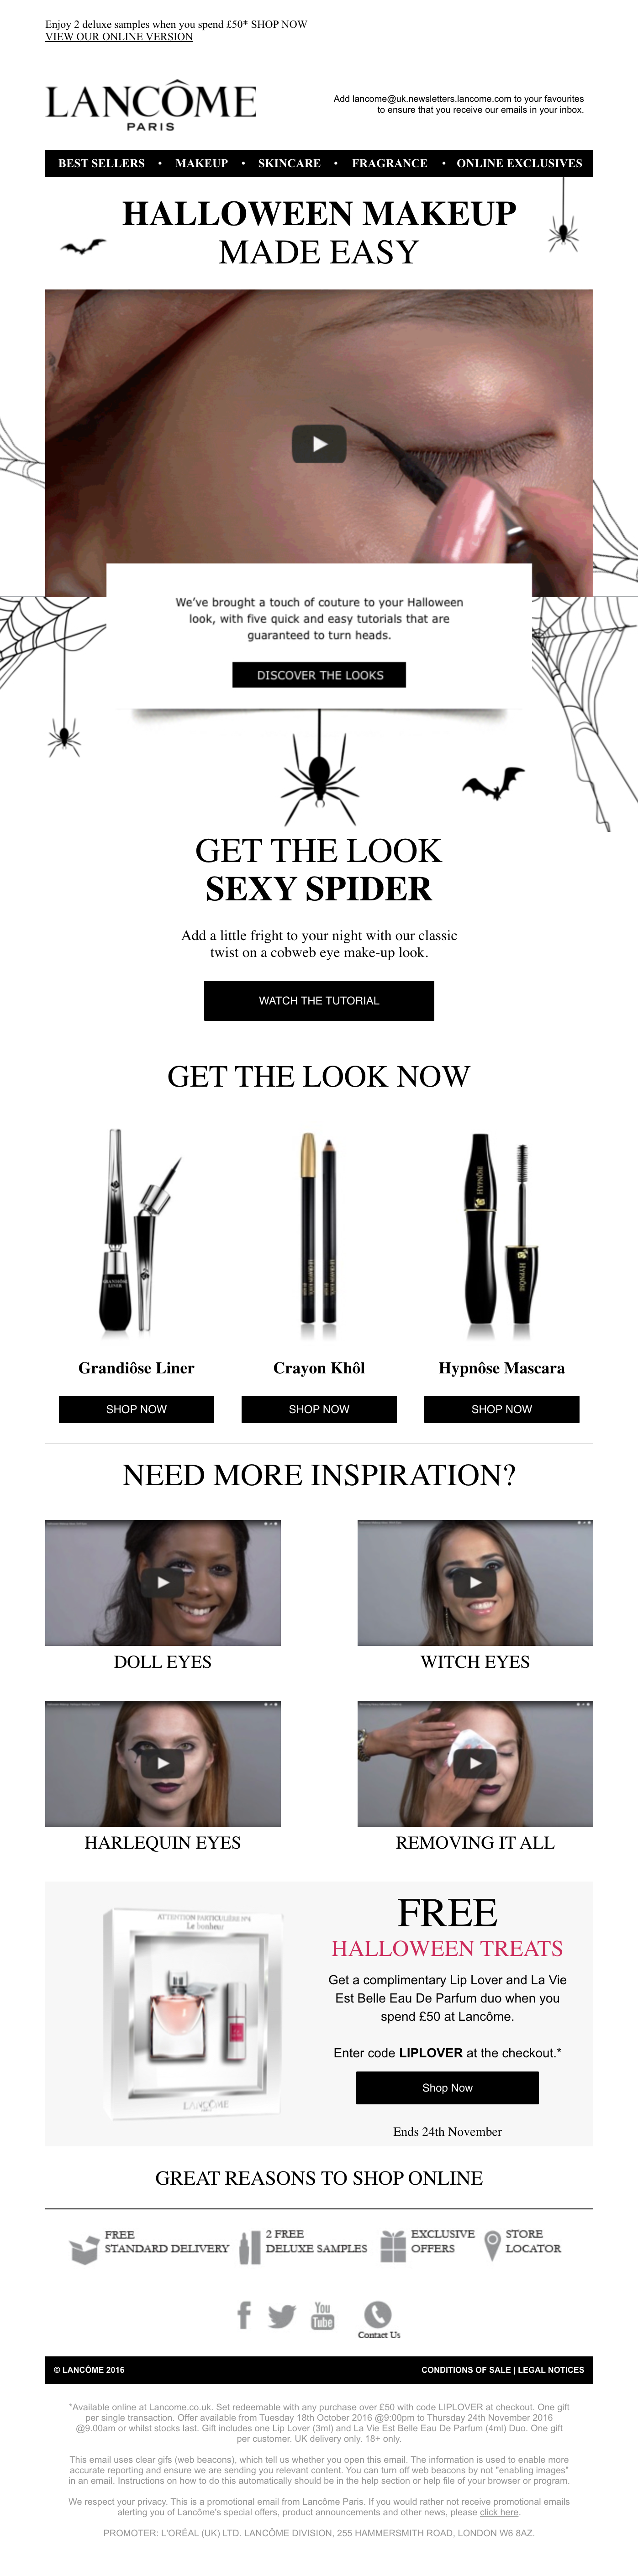 Lancome email example